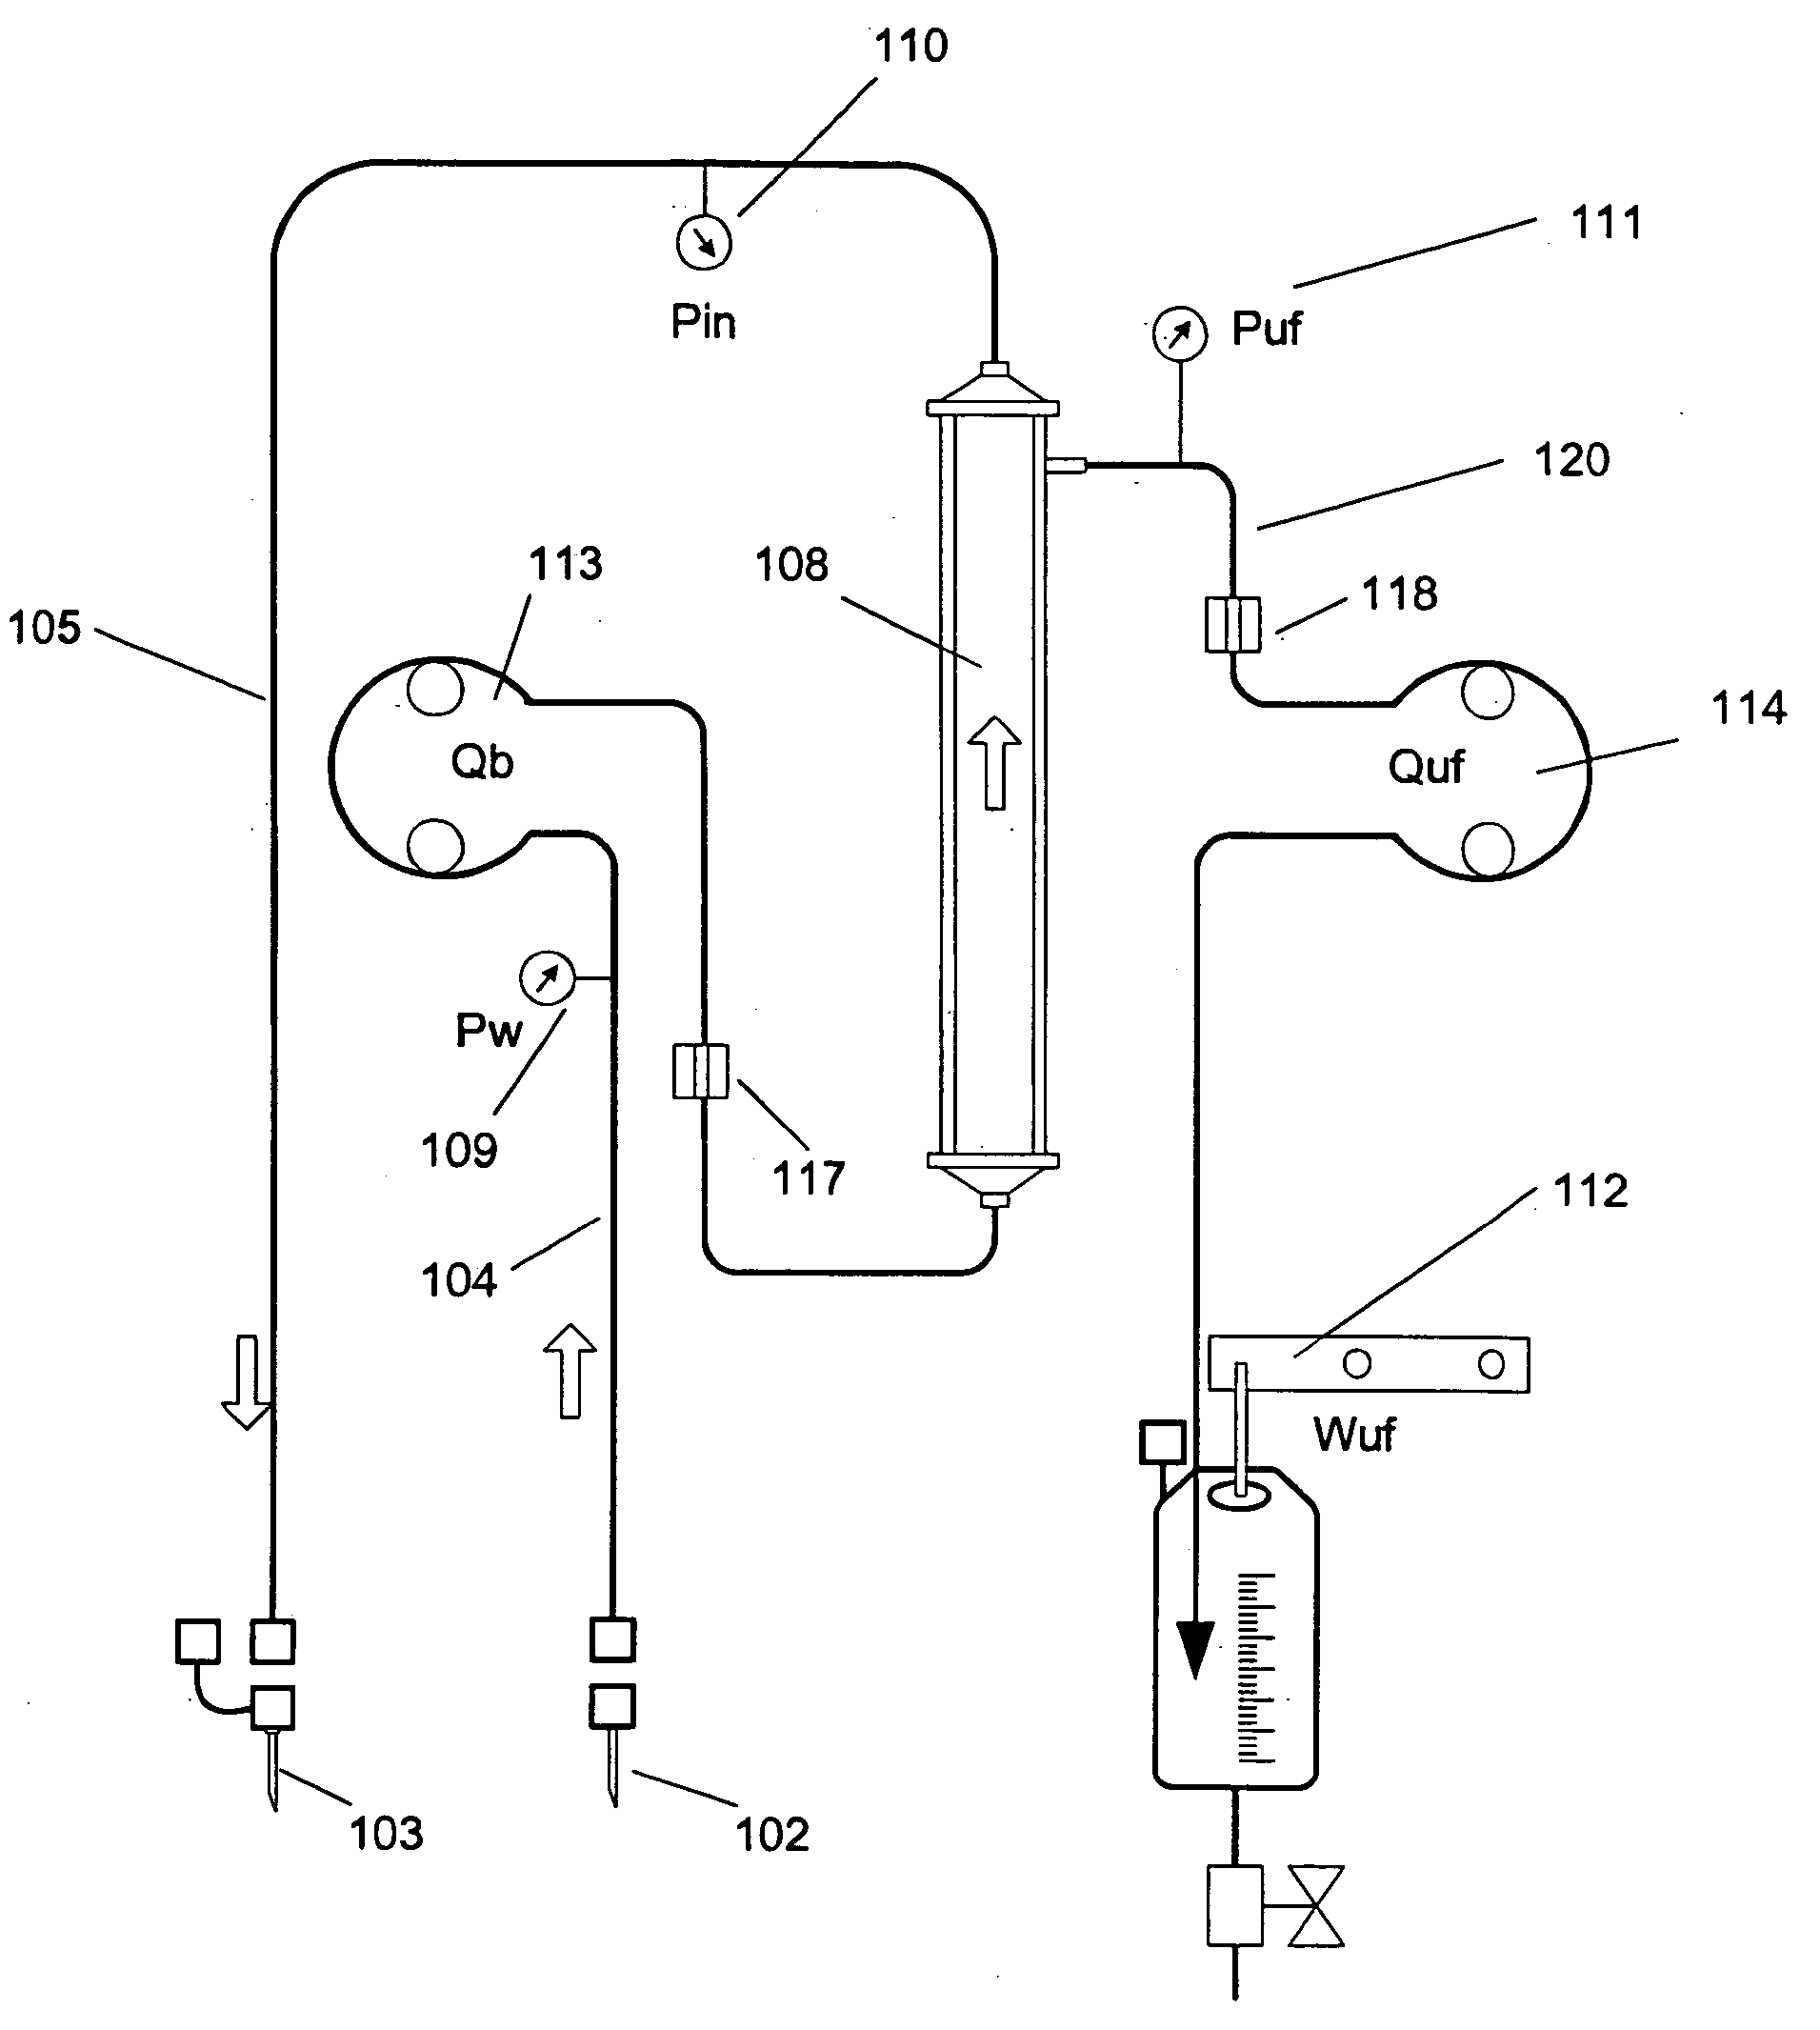 Method and apparatus for blood withdrawal and infusion using a pressure controller